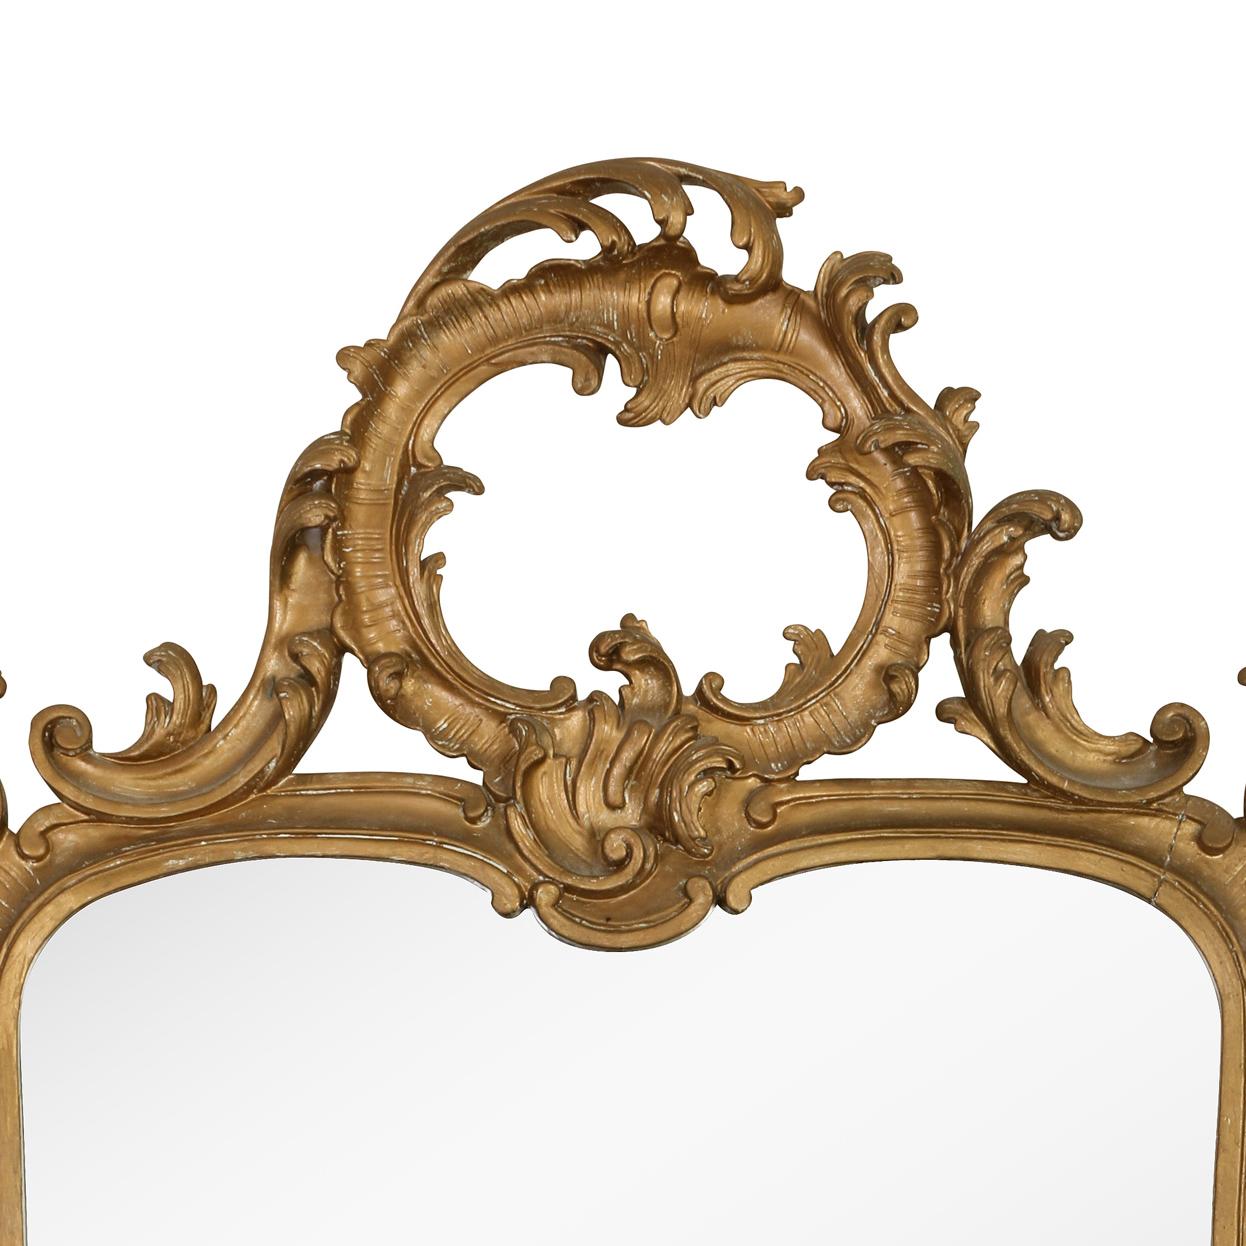 A vintage giltwood Italian mirror with natural patina. The large, rectangular mirror frame is decorated with giltwood scrolls and flourishes with foliate detail and an open round crest at the top.